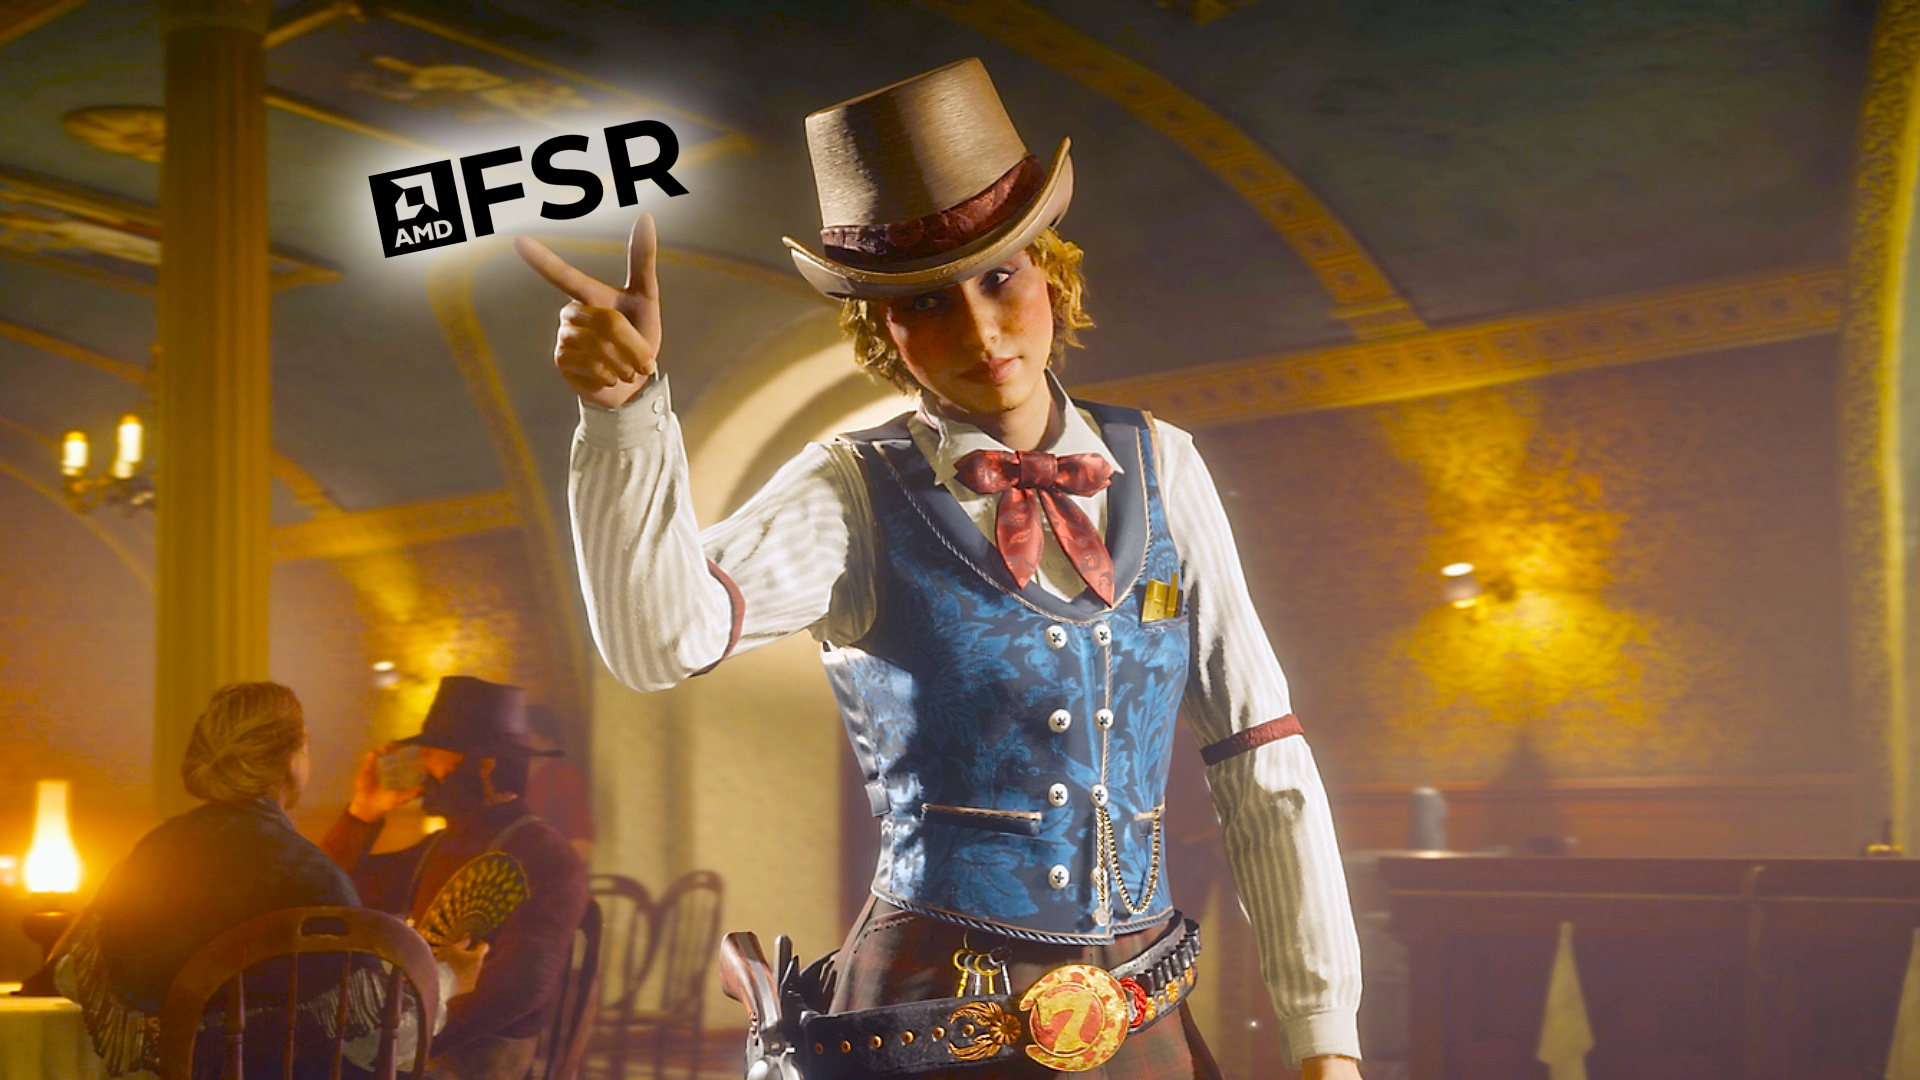 eksplicit Taiko mave mastermind You can now play Red Dead Redemption 2 using AMD FSR 2.0 | PCGamesN